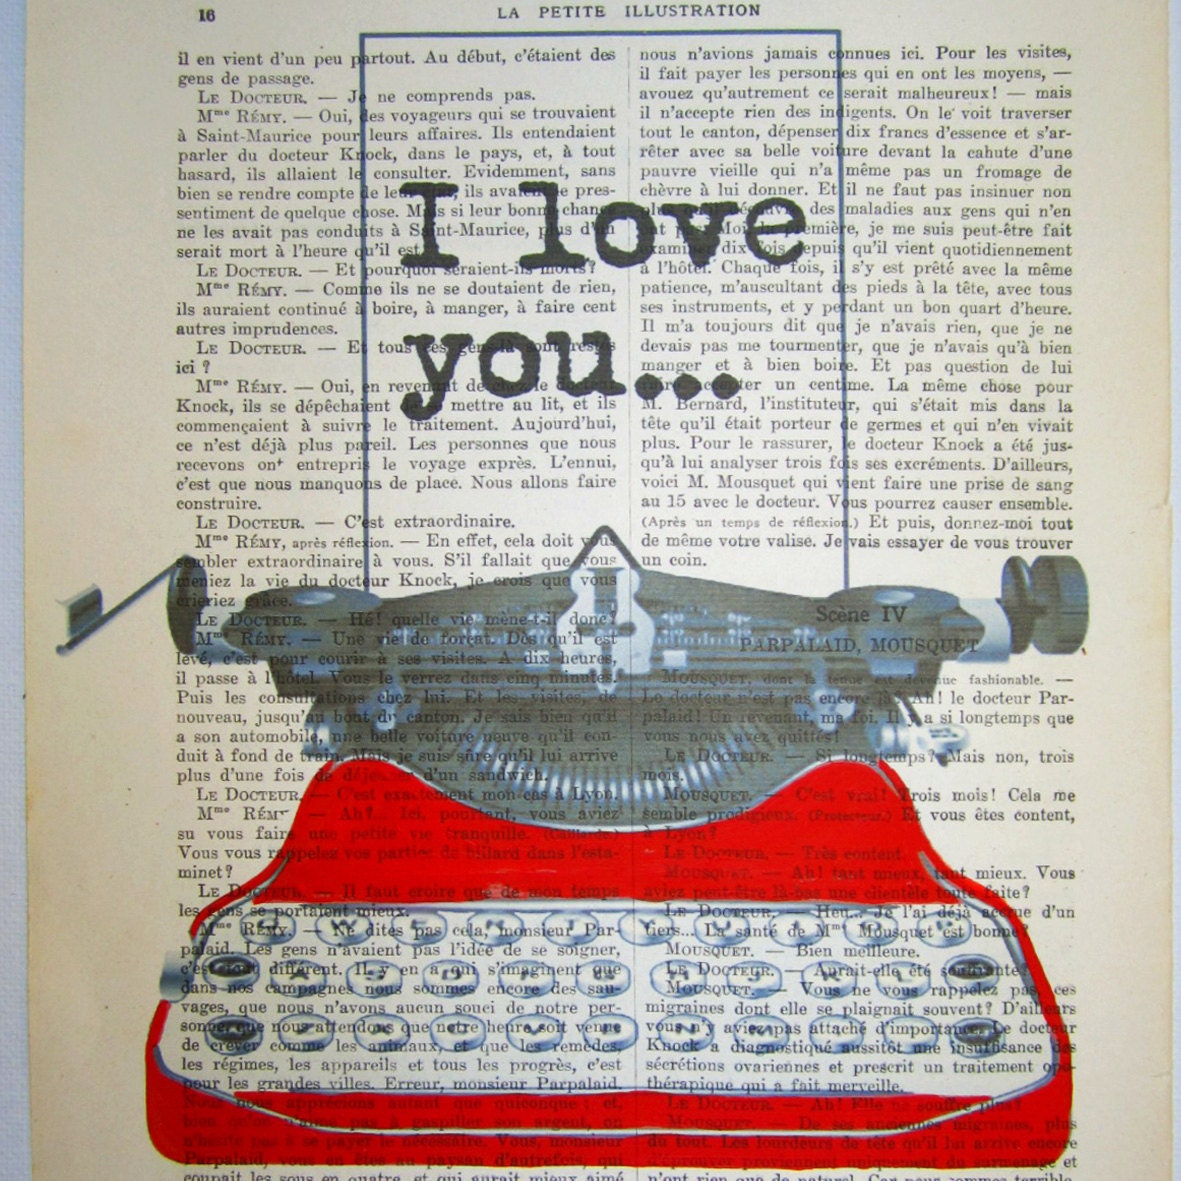 Your own message with red typewriter - ORIGINAL personalized ARTWORK  on 1921 Parisien Magazine 'La Petit Illustration'